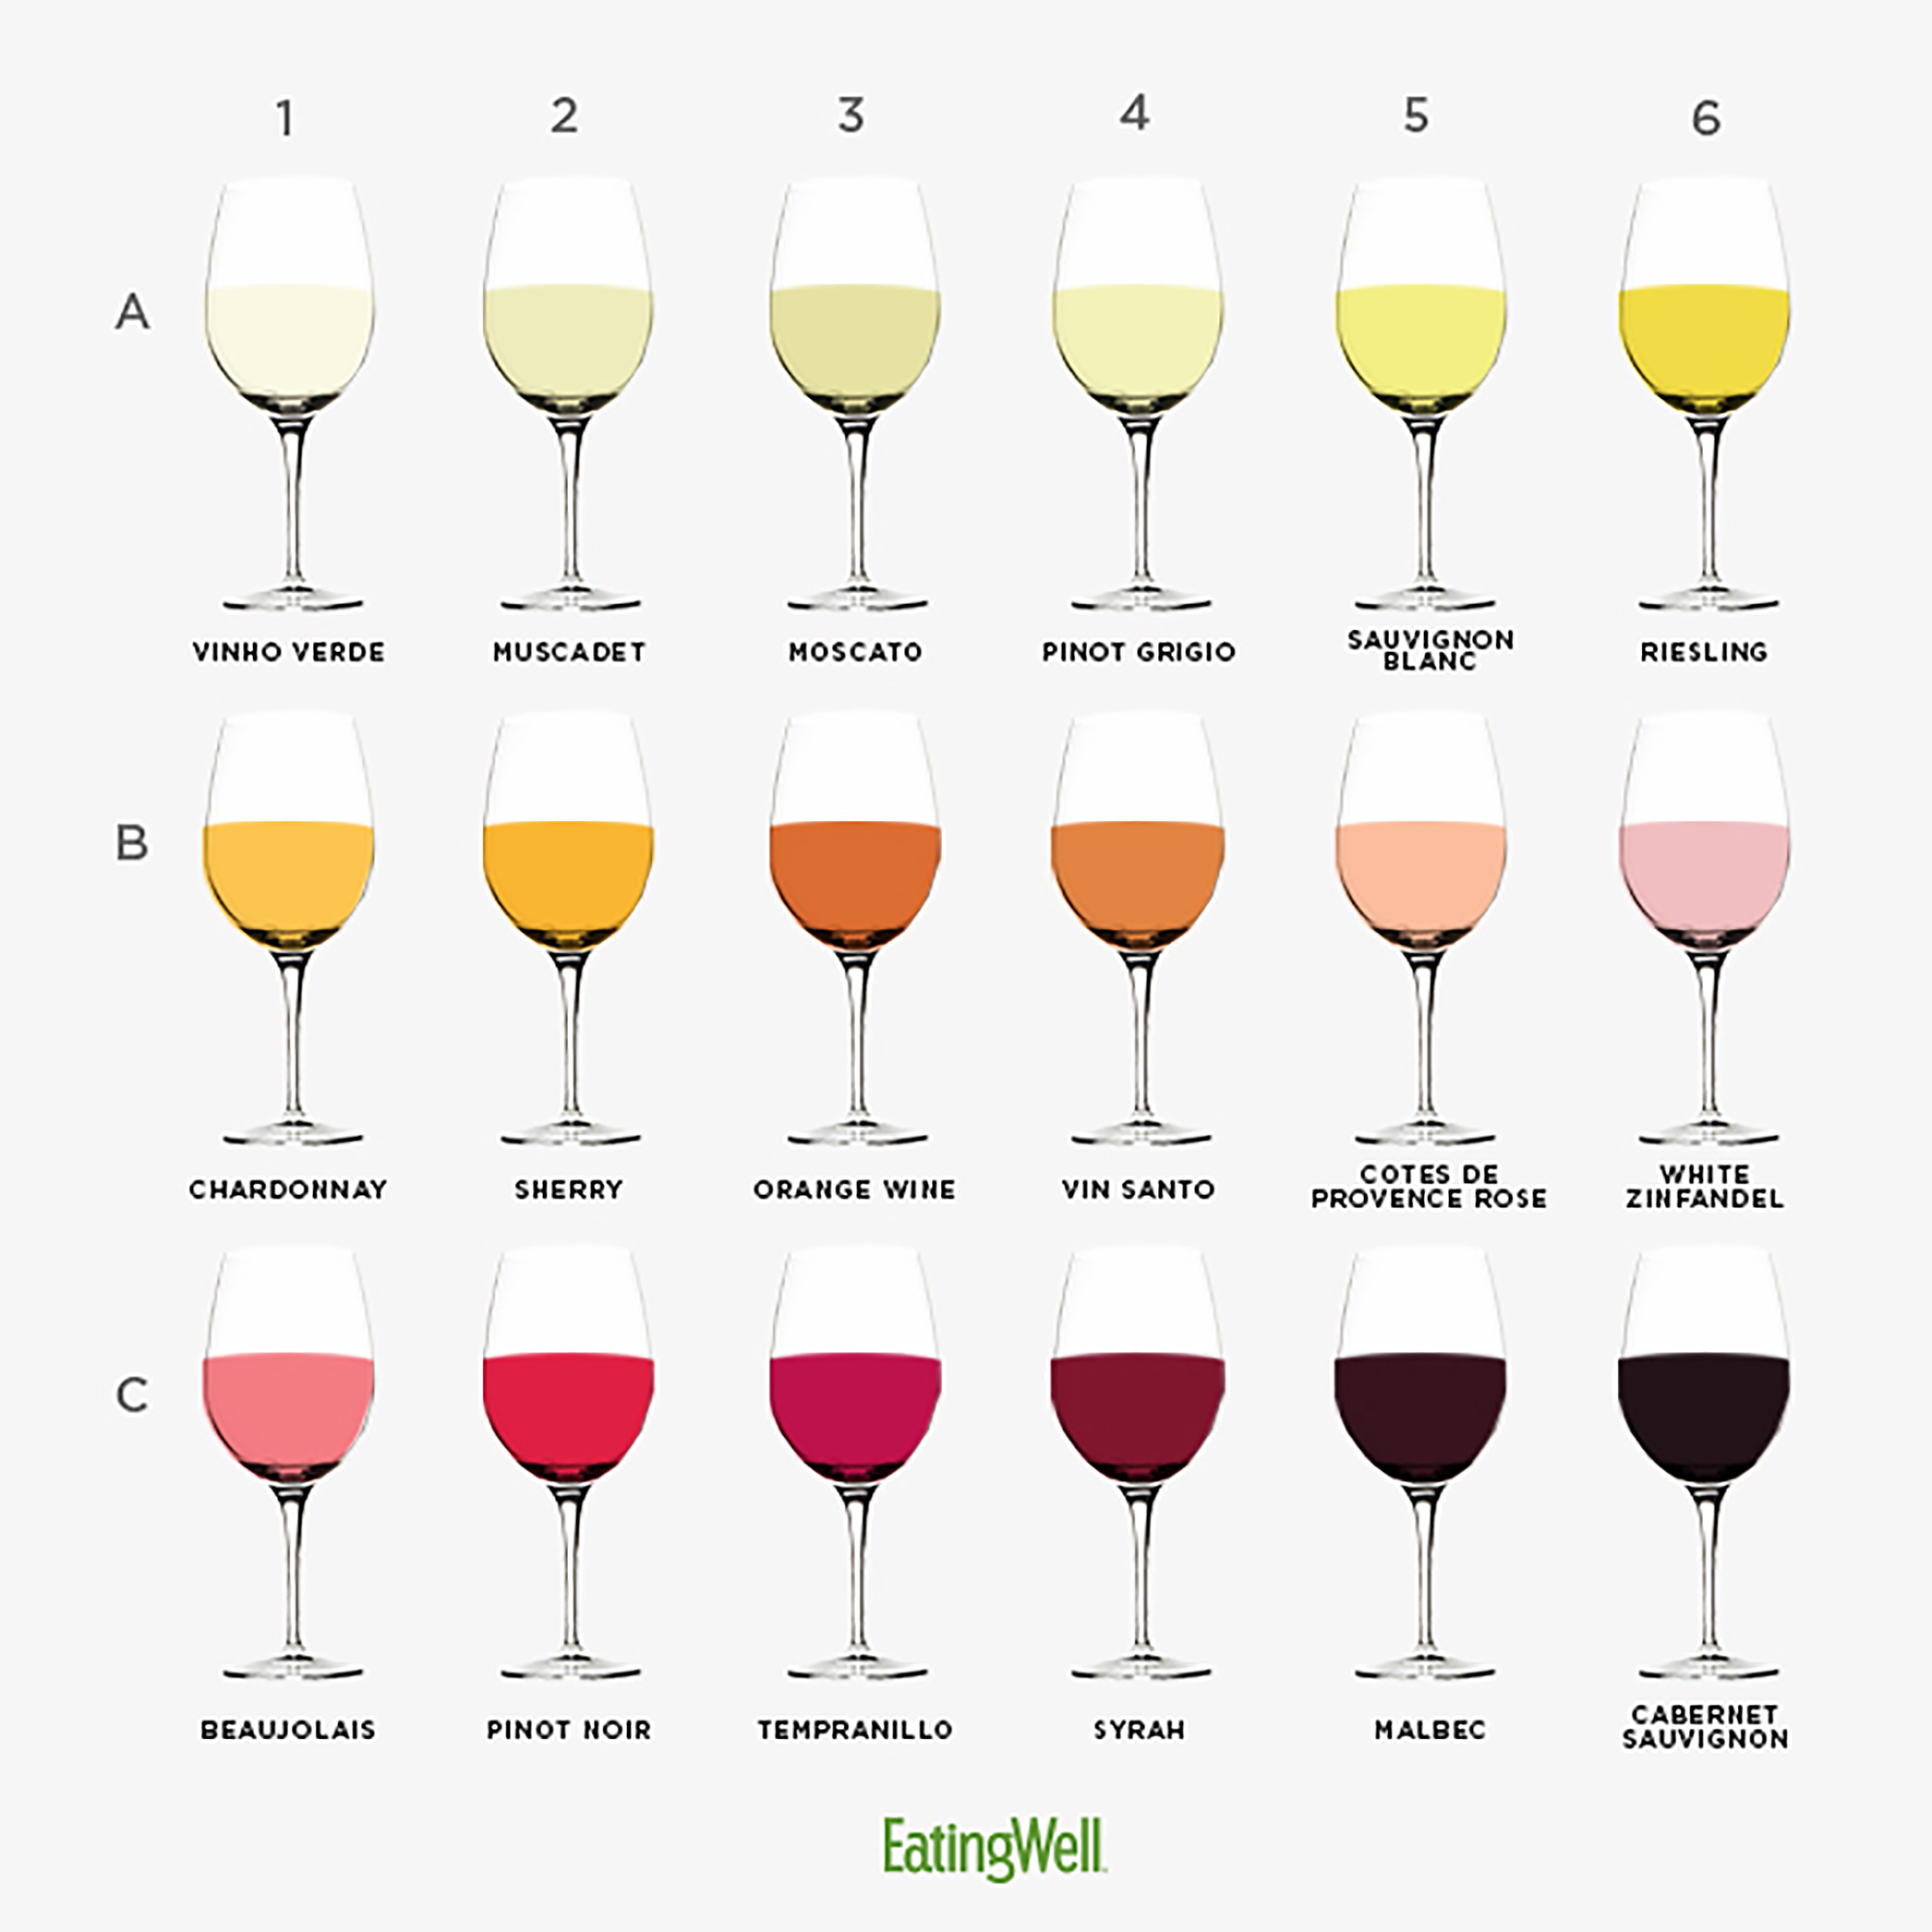 What You Should Know About Your Favorite Wine